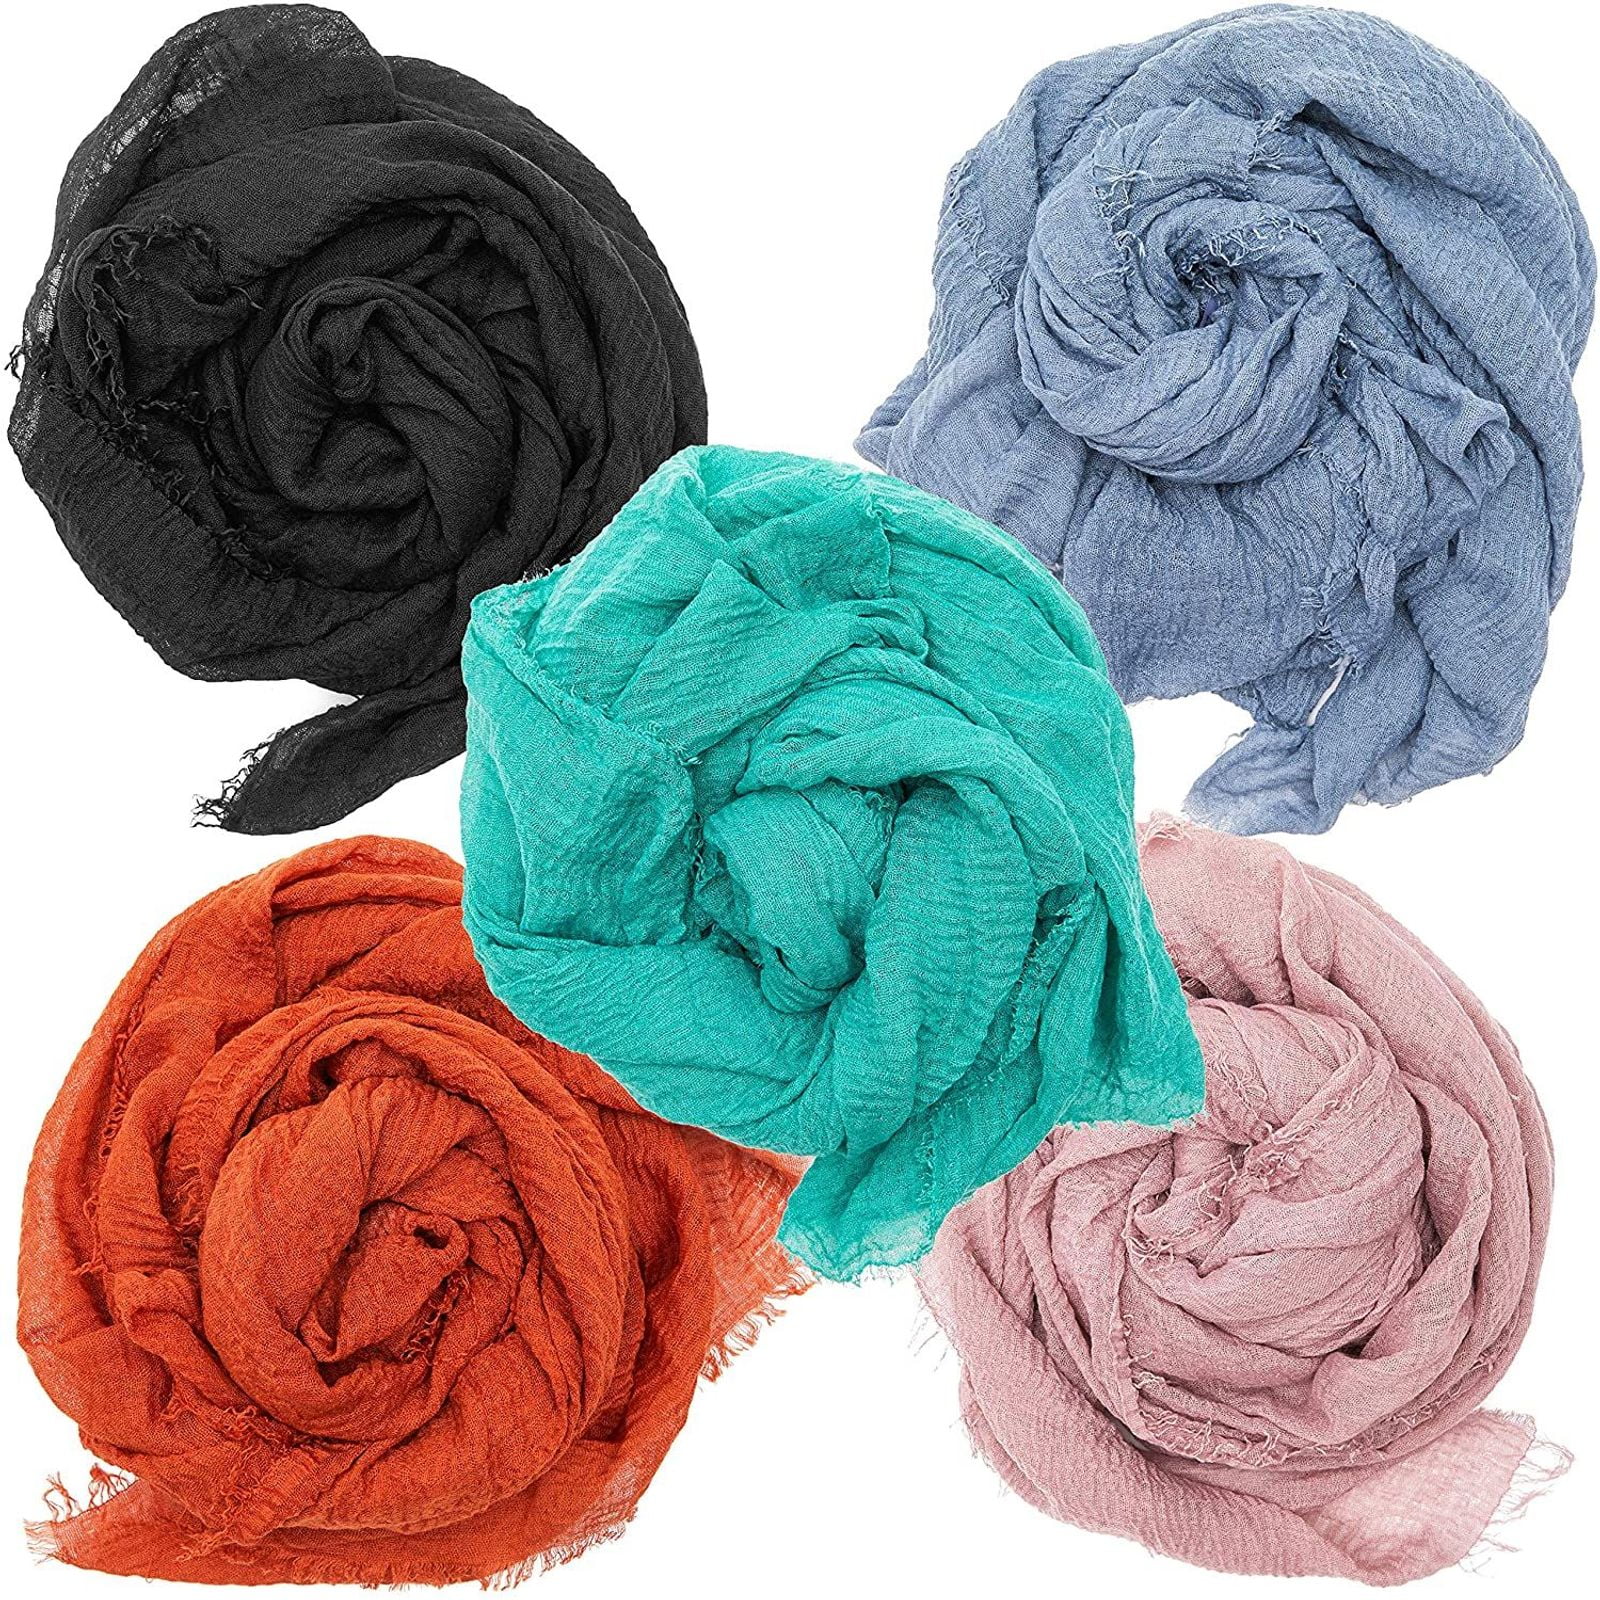 Scarves Shawls Hijab Evening Wrap Cover-Up Woven Reversible Lightweight Stylish 